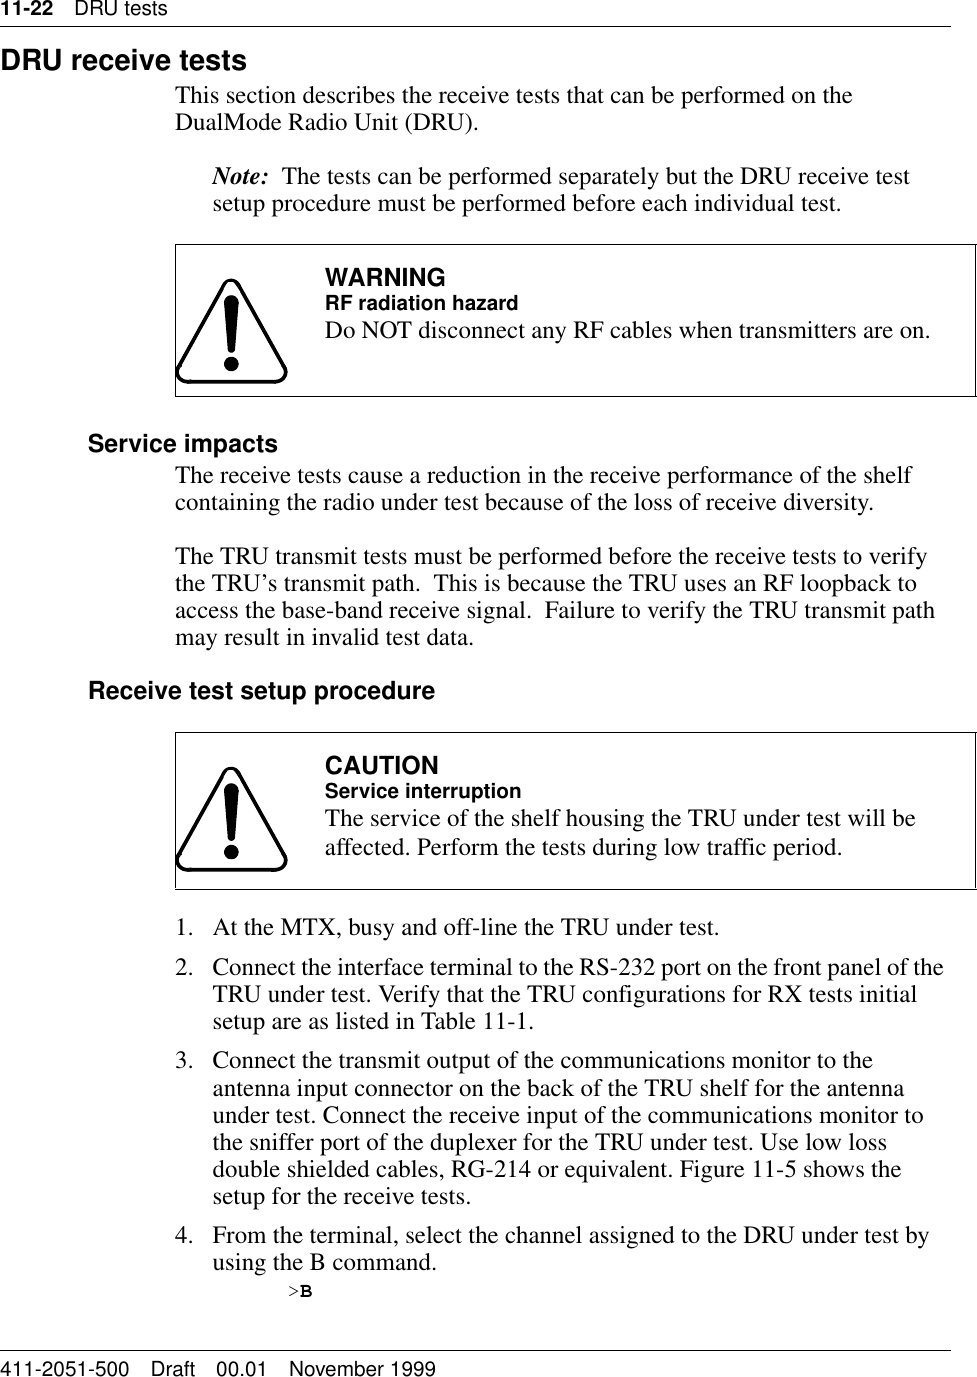 11-22 DRU tests411-2051-500 Draft 00.01 November 1999DRU receive testsThis section describes the receive tests that can be performed on the DualMode Radio Unit (DRU).Note:  The tests can be performed separately but the DRU receive test setup procedure must be performed before each individual test.Service impactsThe receive tests cause a reduction in the receive performance of the shelf containing the radio under test because of the loss of receive diversity.The TRU transmit tests must be performed before the receive tests to verify the TRU’s transmit path.  This is because the TRU uses an RF loopback to access the base-band receive signal.  Failure to verify the TRU transmit path may result in invalid test data.Receive test setup procedure1. At the MTX, busy and off-line the TRU under test.2. Connect the interface terminal to the RS-232 port on the front panel of the TRU under test. Verify that the TRU configurations for RX tests initial setup are as listed in Table 11-1.3. Connect the transmit output of the communications monitor to the antenna input connector on the back of the TRU shelf for the antenna under test. Connect the receive input of the communications monitor to the sniffer port of the duplexer for the TRU under test. Use low loss double shielded cables, RG-214 or equivalent. Figure 11-5 shows the setup for the receive tests.4. From the terminal, select the channel assigned to the DRU under test by using the B command.&gt;BWARNINGRF radiation hazardDo NOT disconnect any RF cables when transmitters are on.CAUTIONService interruptionThe service of the shelf housing the TRU under test will be affected. Perform the tests during low traffic period.